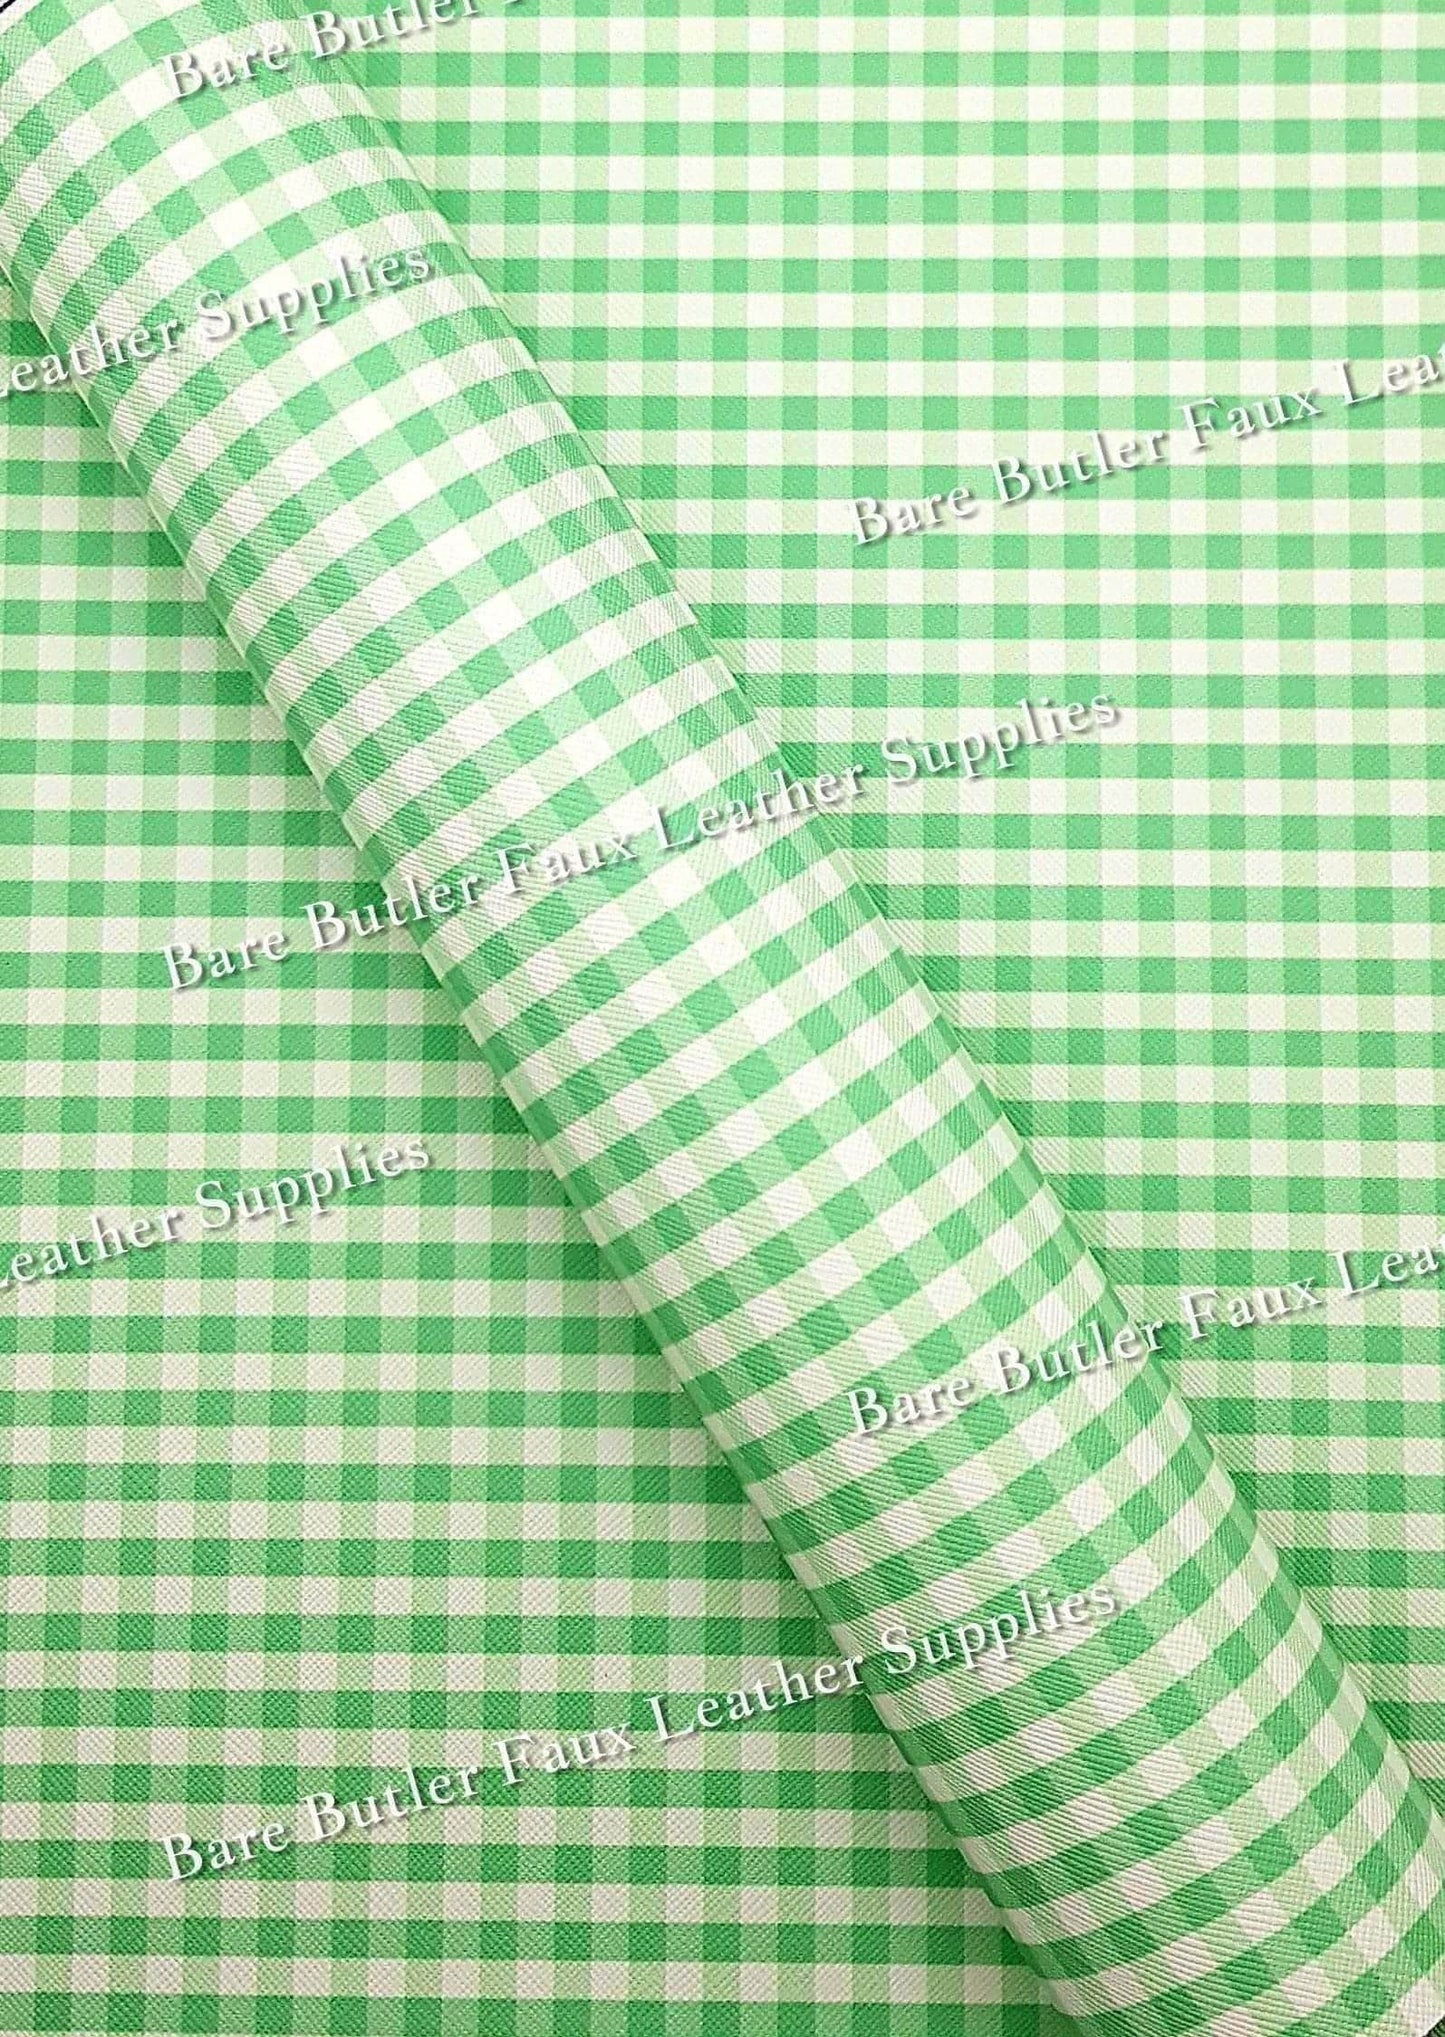 Green & White Gingham Faux Leather - Faux, Faux Leather, gingham, green & white, Leather, leatherette - Bare Butler Faux Leather Supplies 